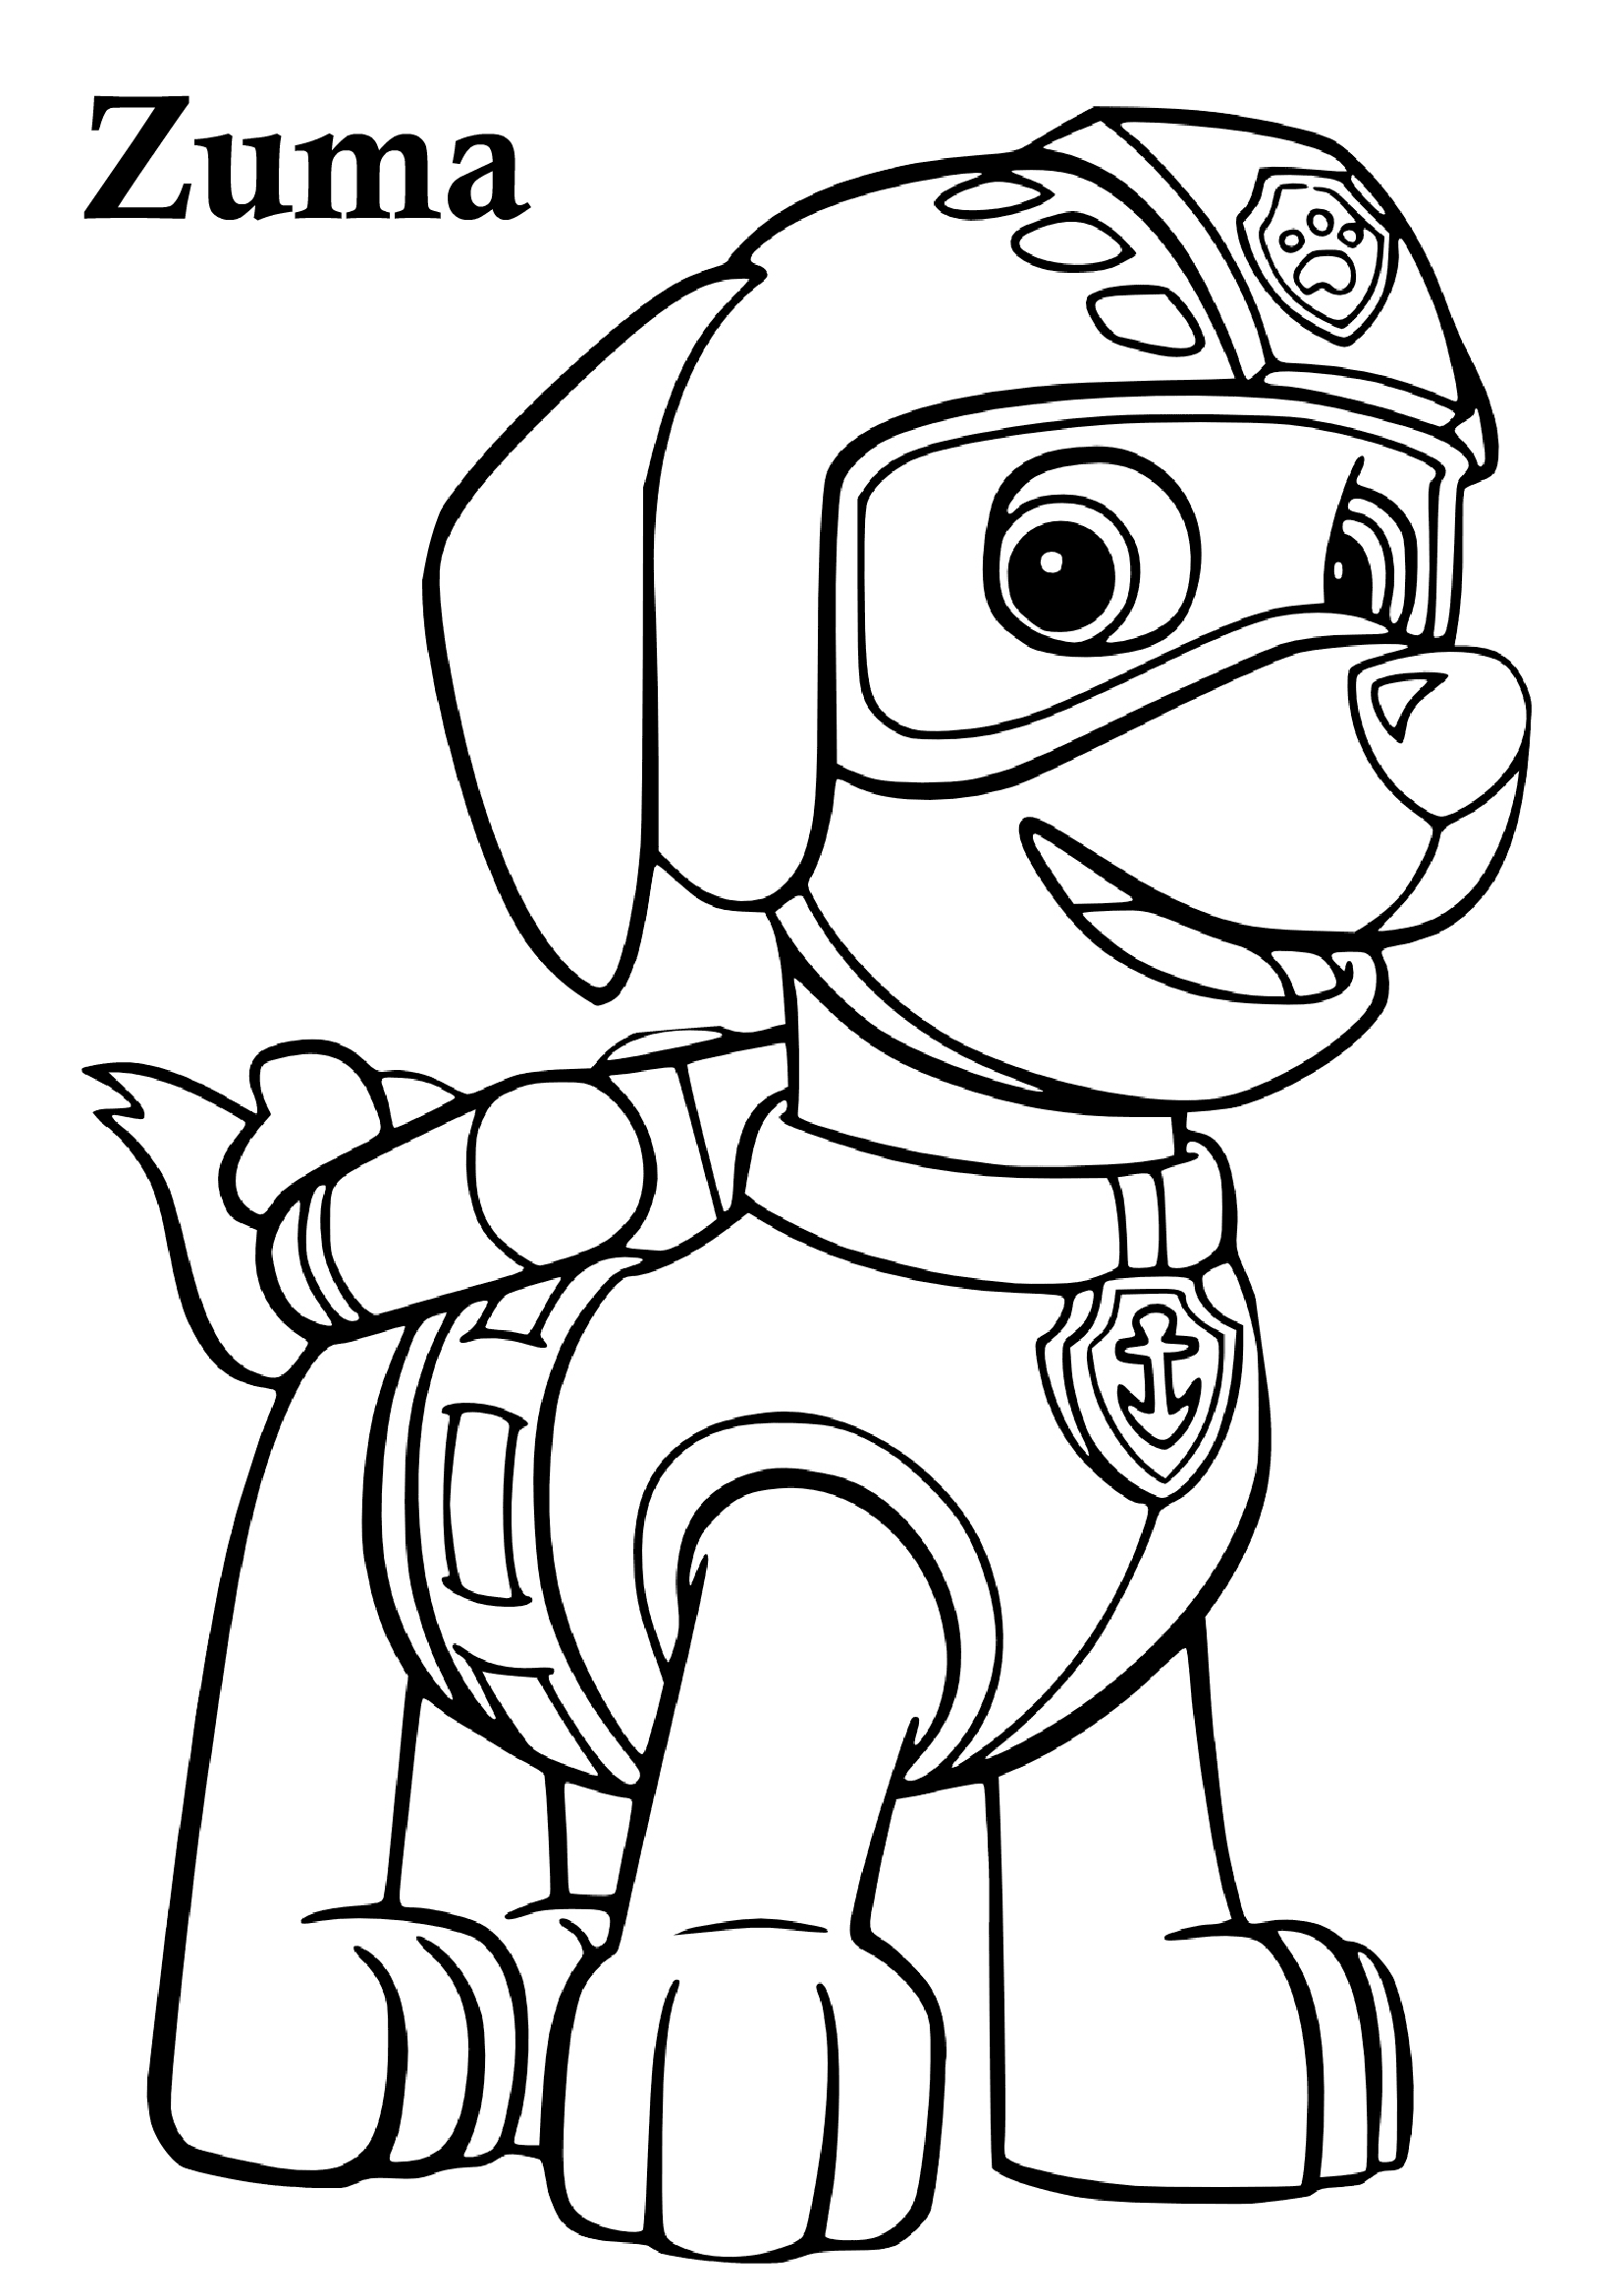 Patrol Halloween Coloring Pages €� - Coloring Home